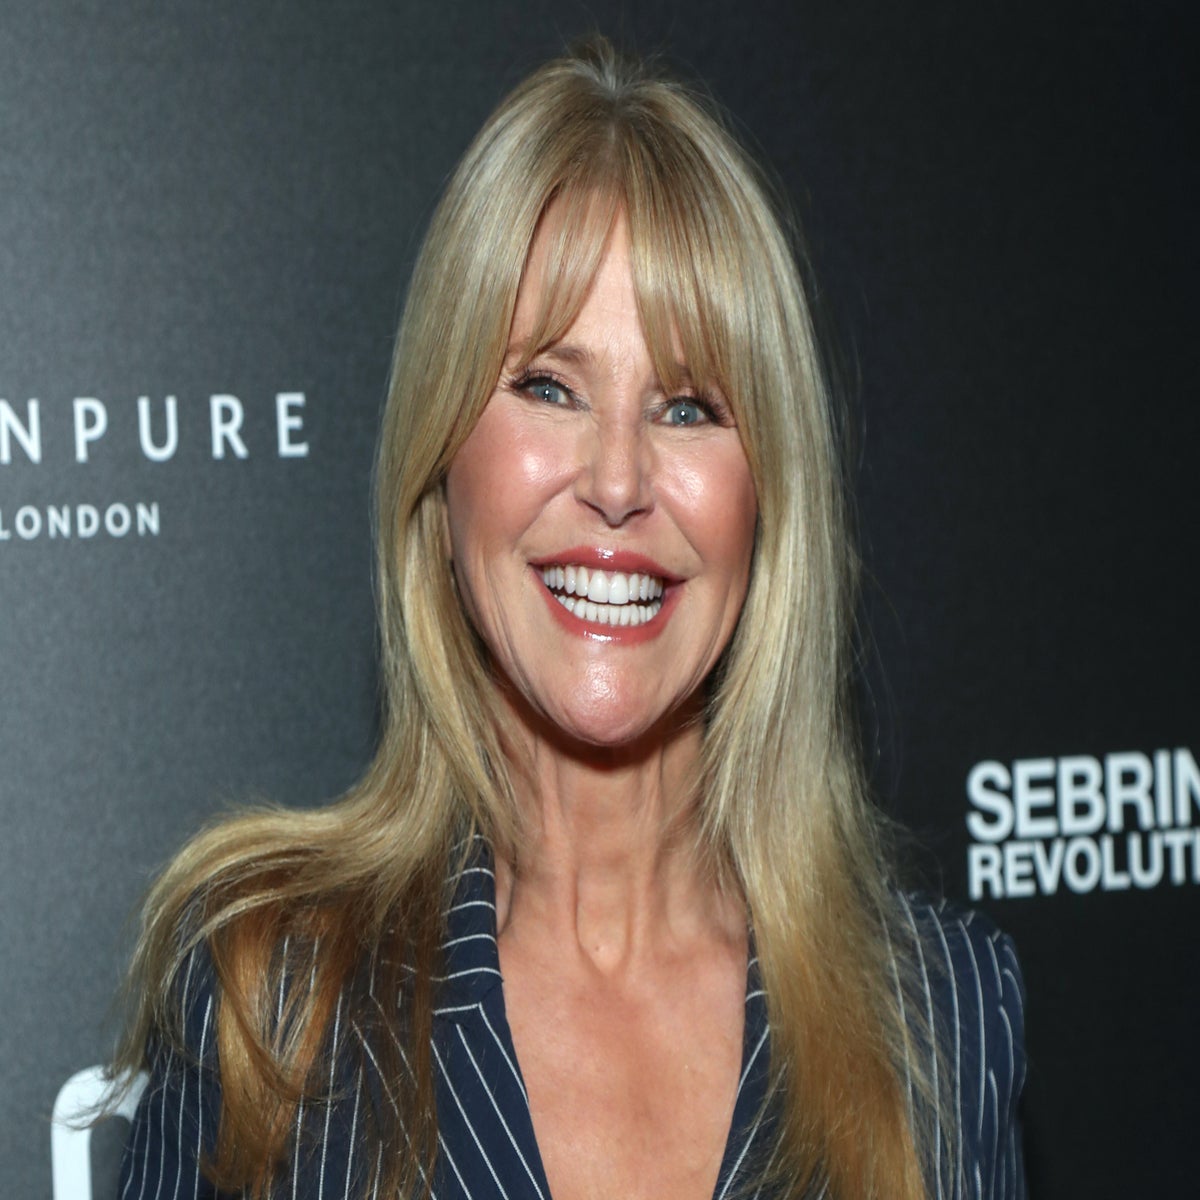 Christie Brinkley Free Homemade Sex Tape - Christie Brinkley shuts down critics of new selfie: 'The Wrinkle Brigade is  out in full force' | The Independent